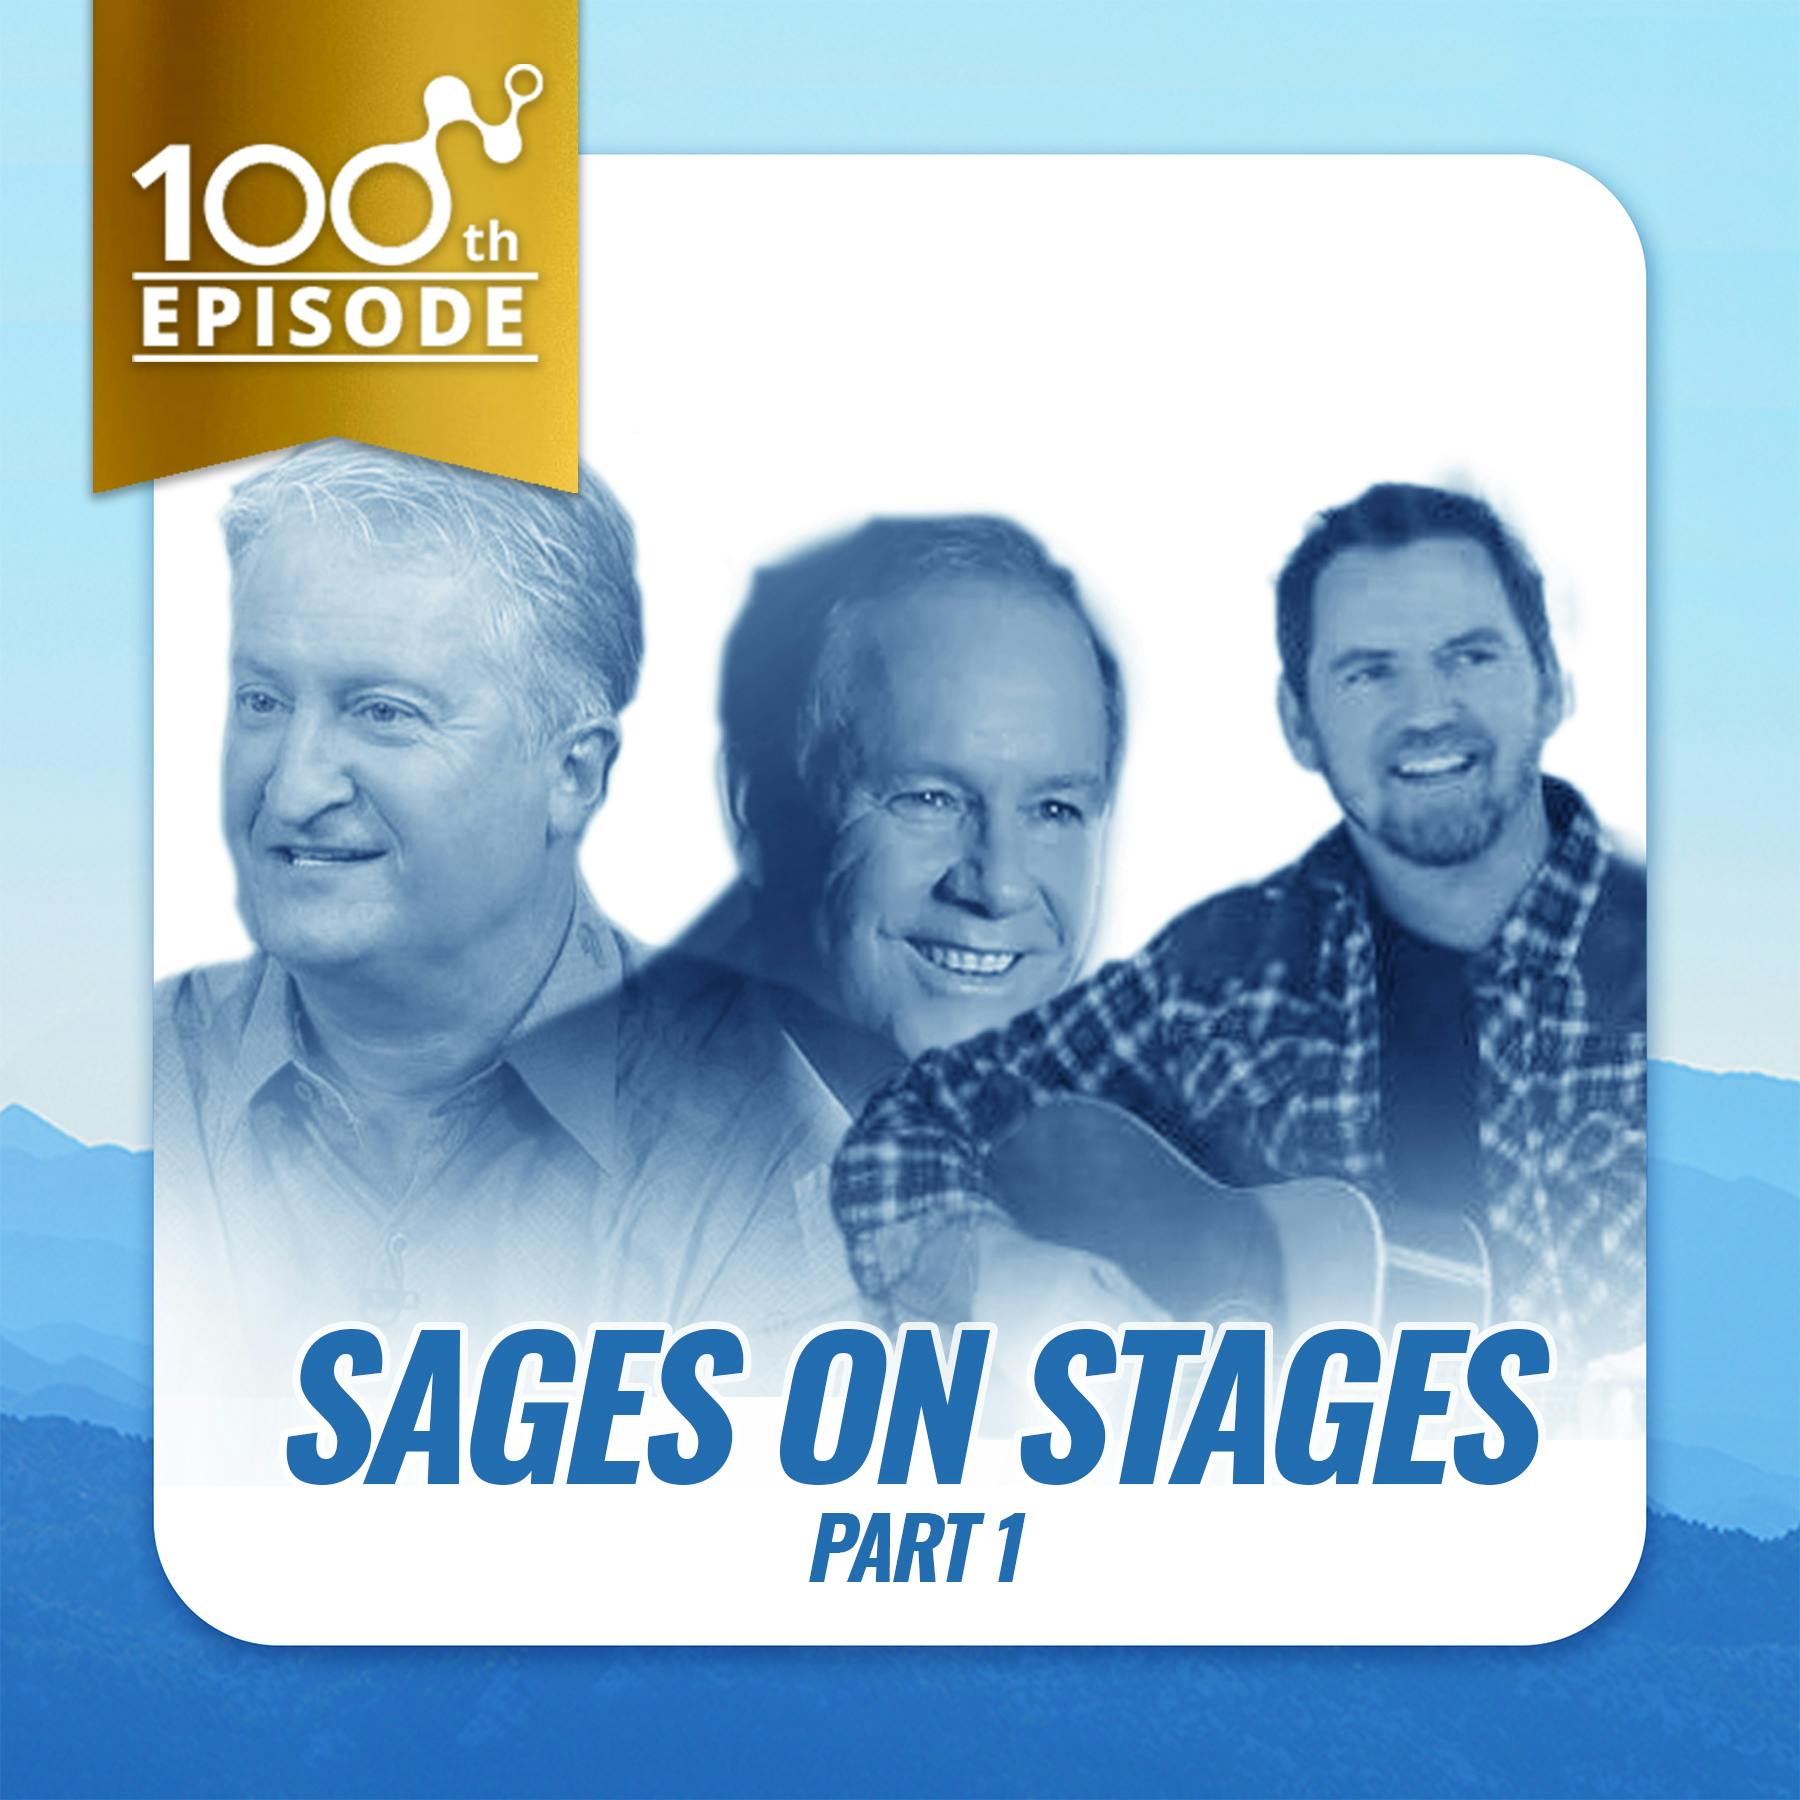 100th Episode: Sages on Stages Part 1